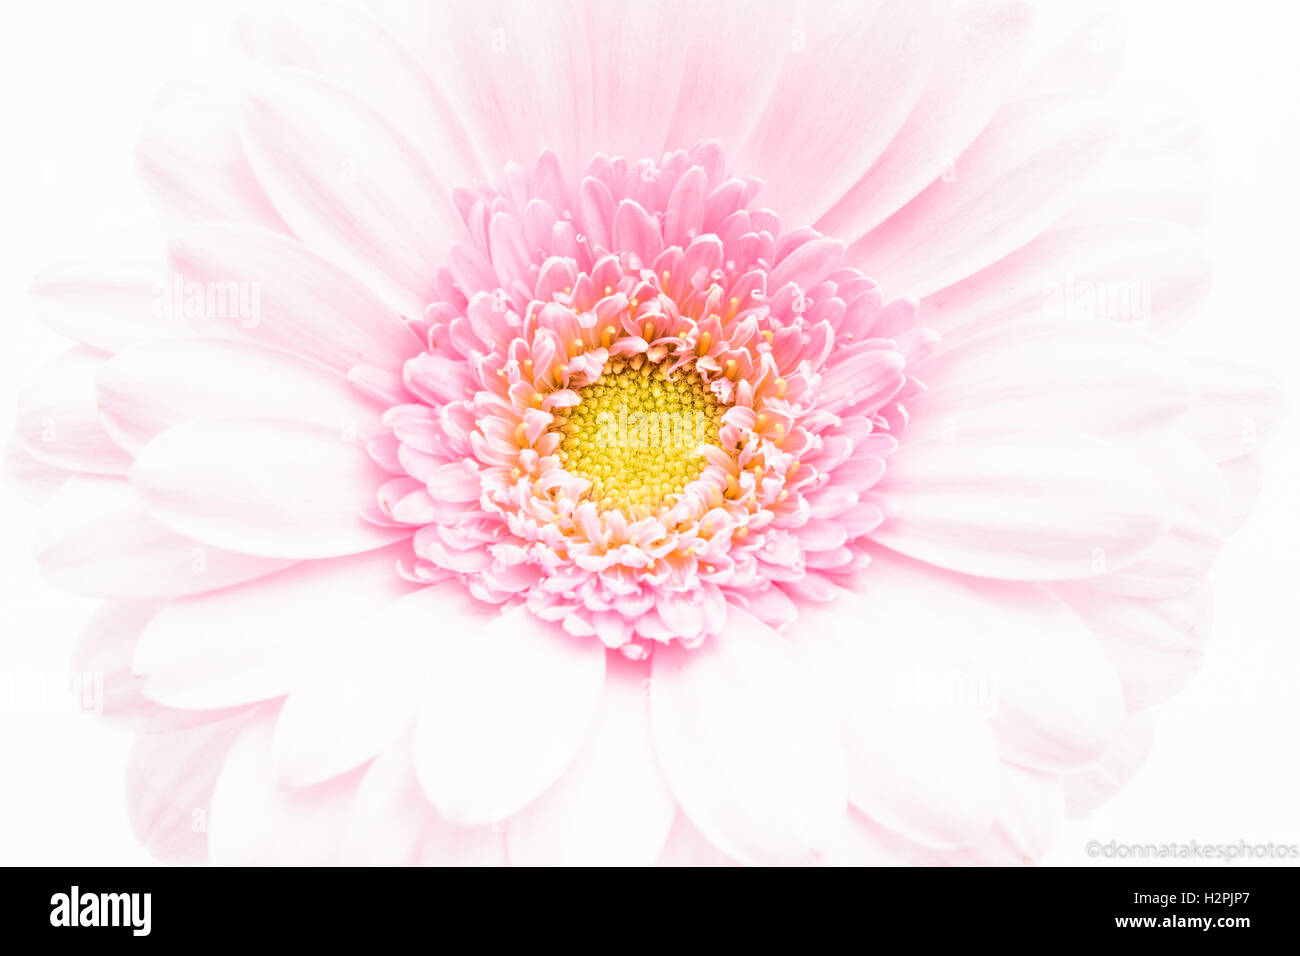 Pink and yellow centre flower Stock Photo